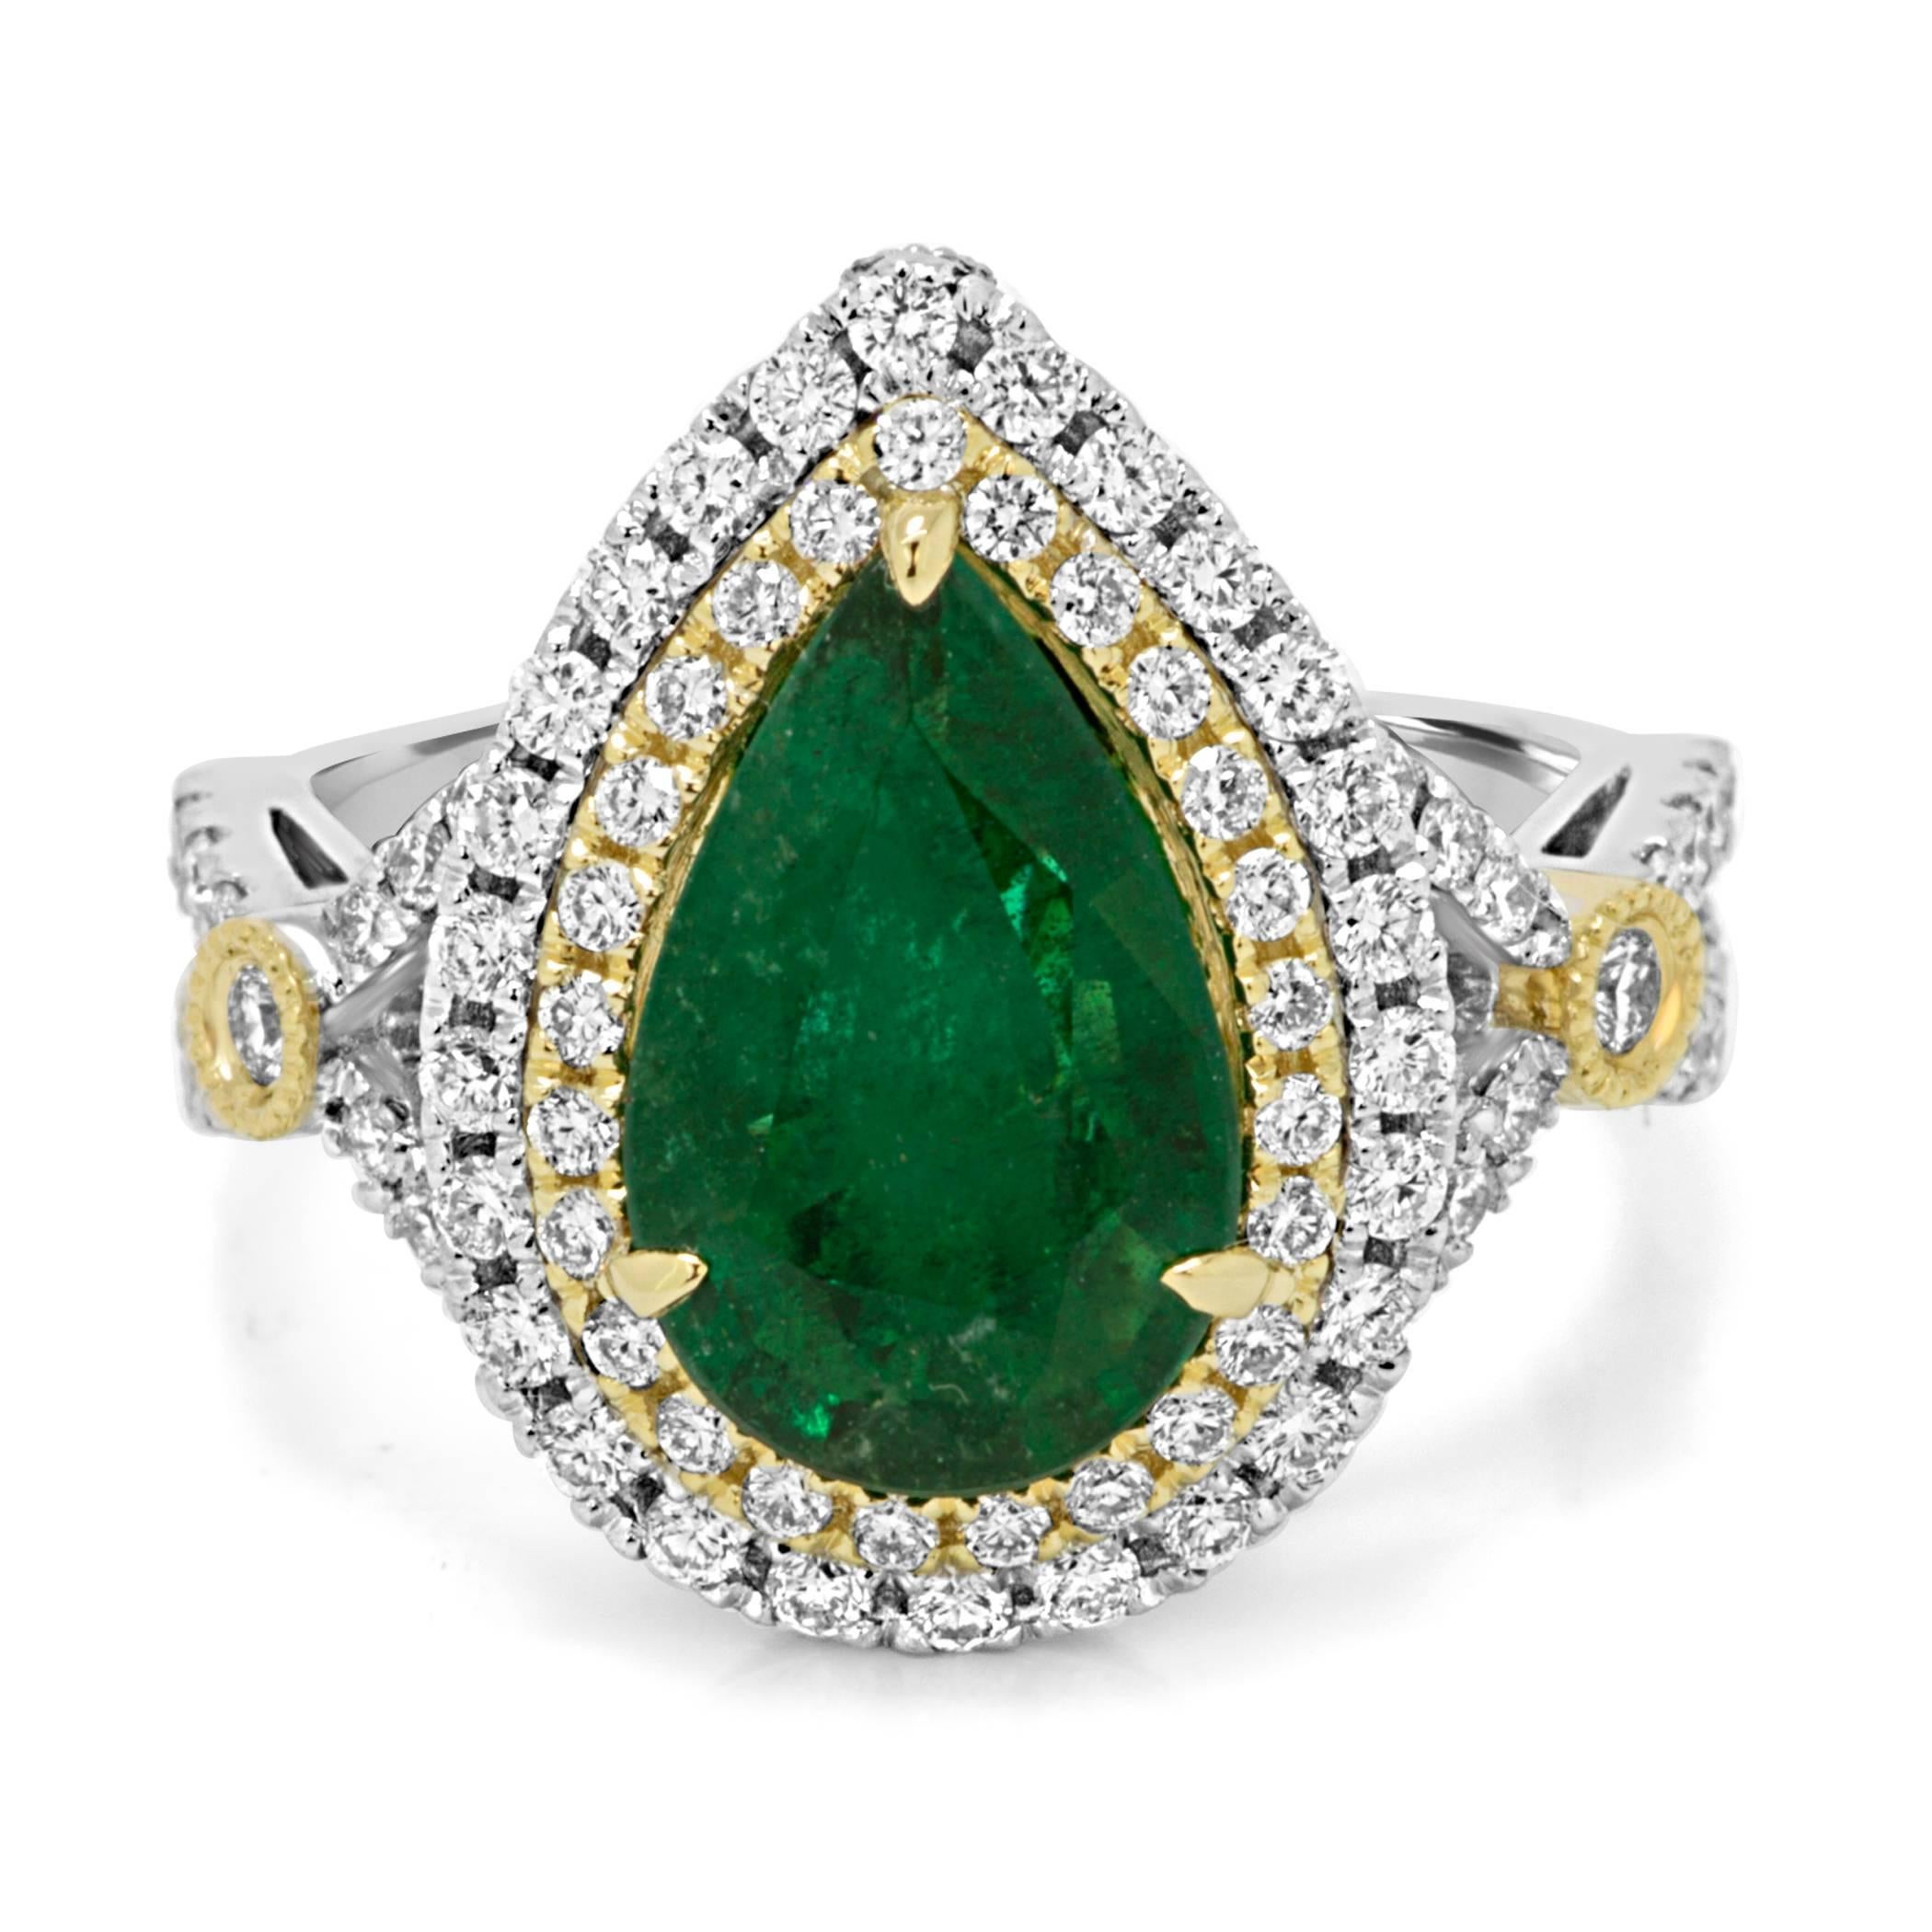 Exquisite Emerald Pear 2.33 Carat Encircled in a Double Halo of Colorless Round VS-SI  Diamonds 1.00 Carat in 14K White and Yellow Gold Ring.

Style available in different price ranges. Prices are based on your selection of 4C's Cut, Color, Carat,